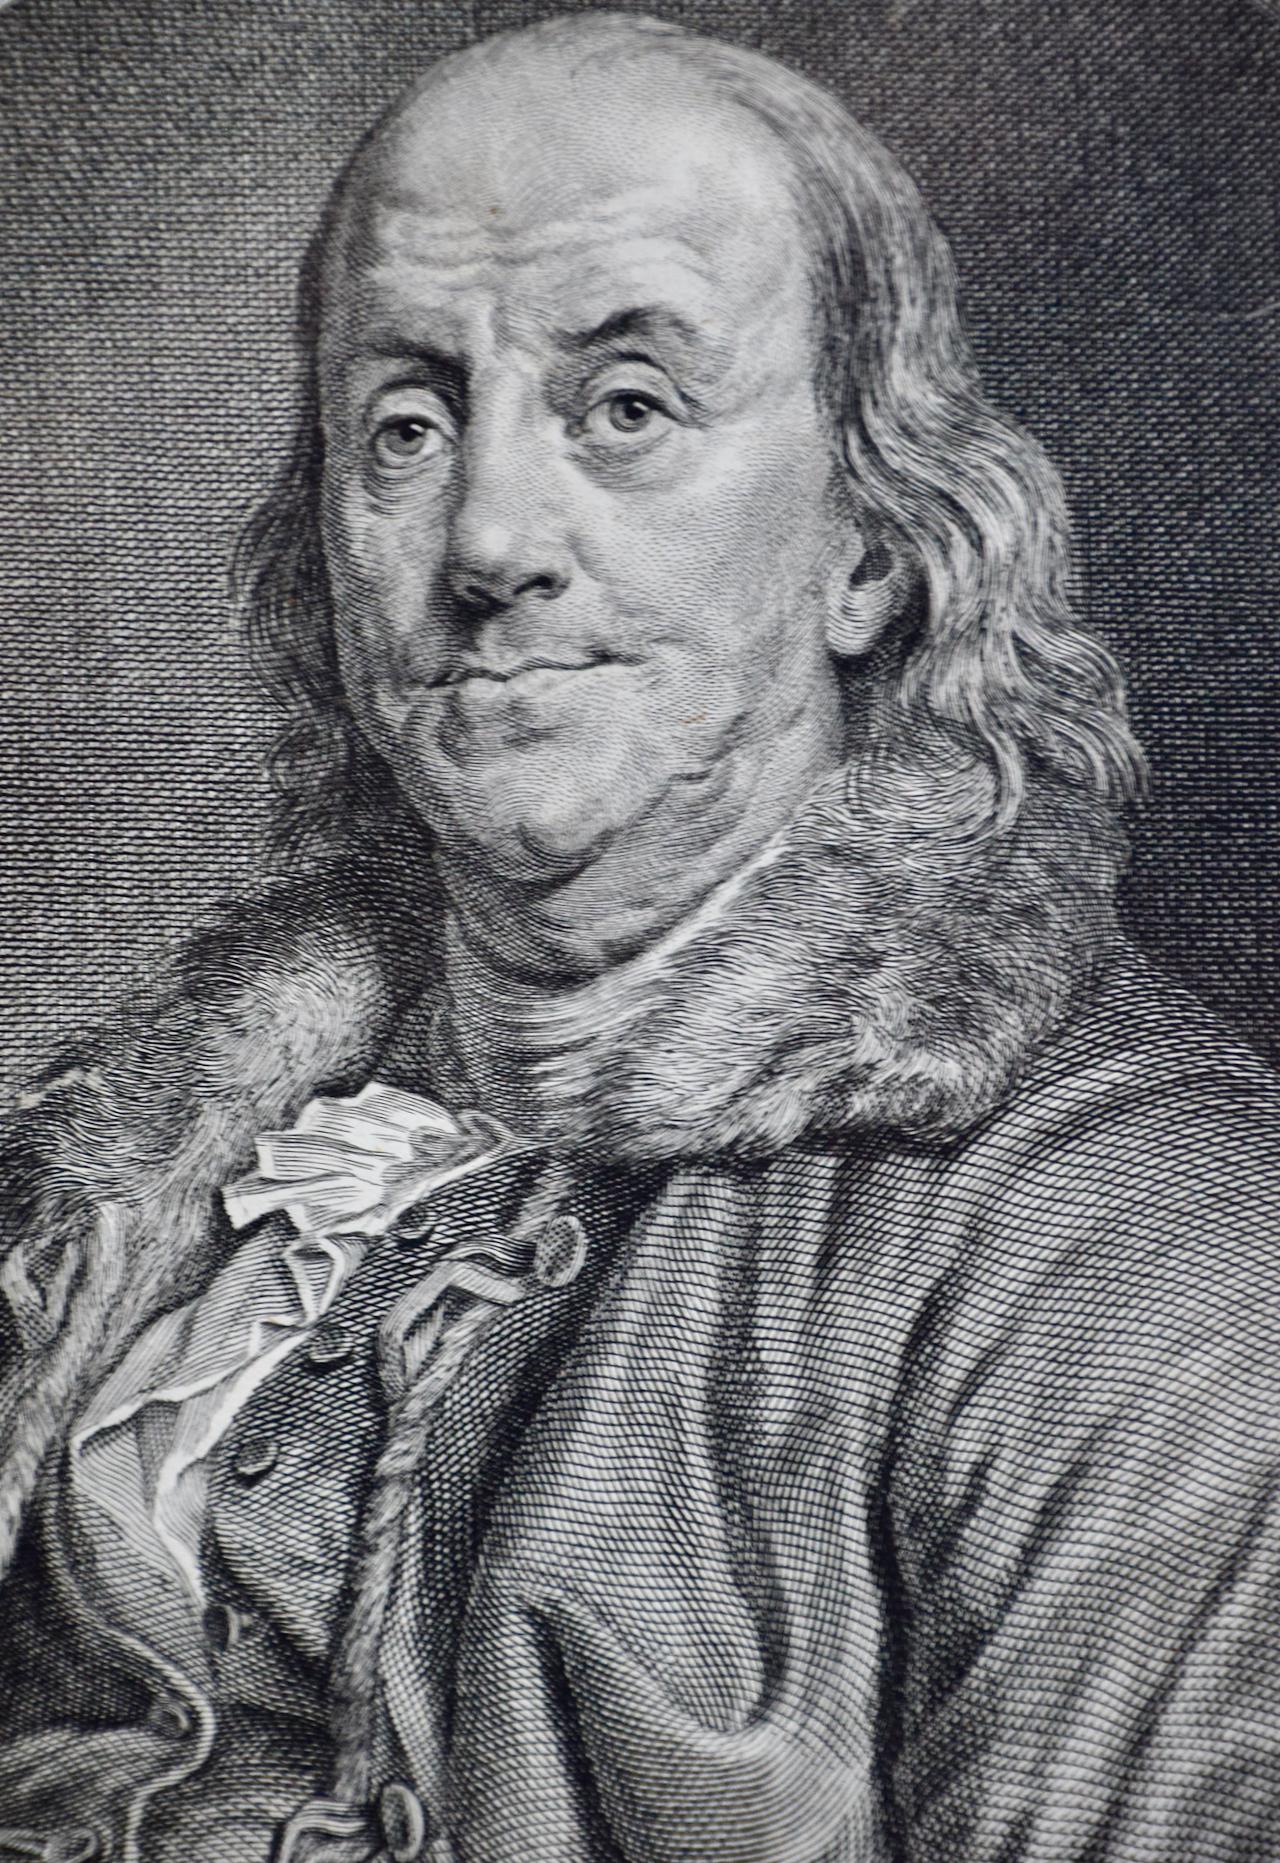  Benjamin Franklin: A Framed 18th Century Portrait of by Duplessis  - Print by Joseph Duplessis